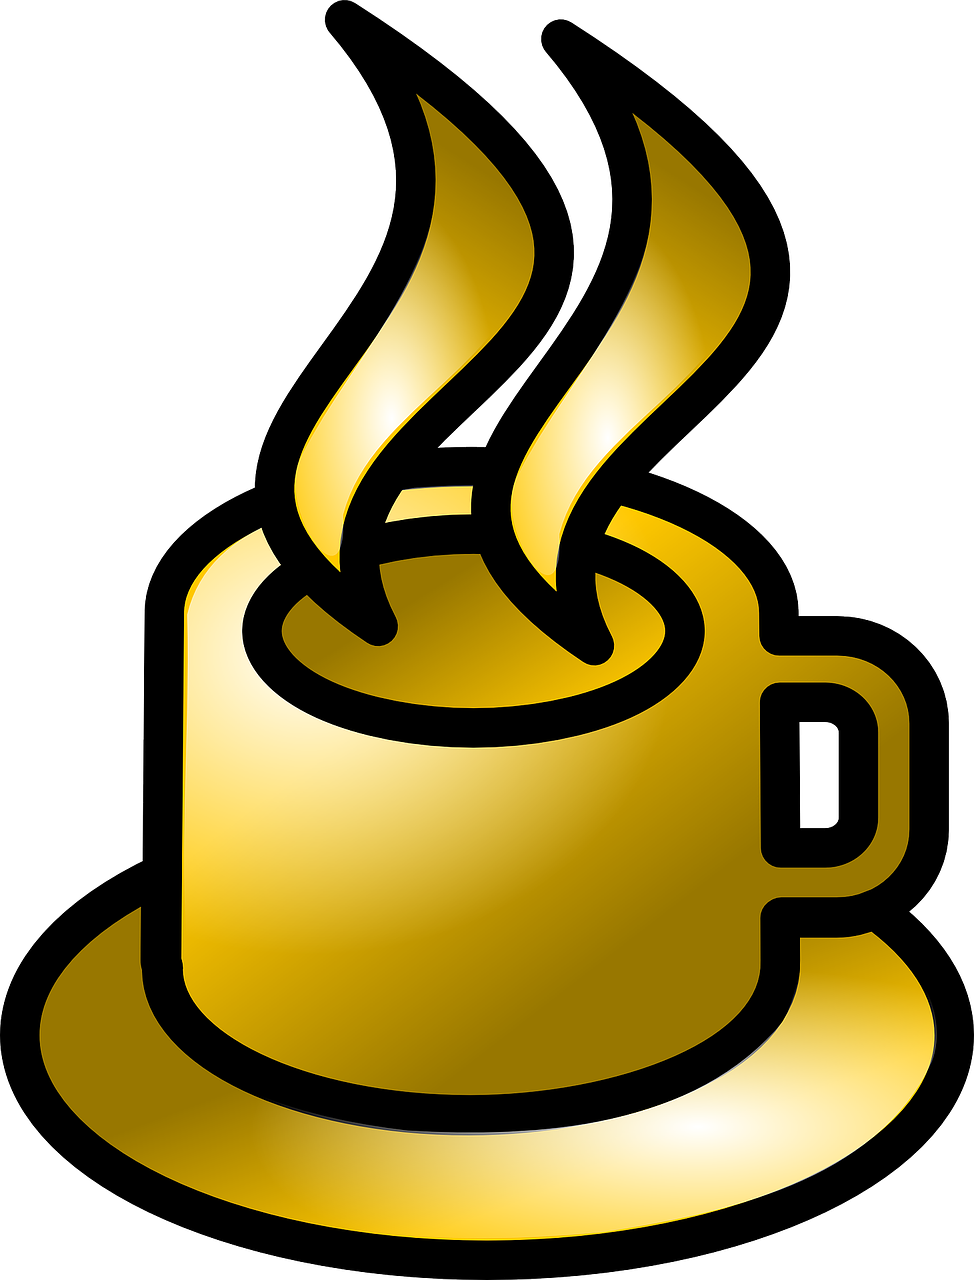 Tea Coffee Cafe Golden Cup Free HQ Image Clipart